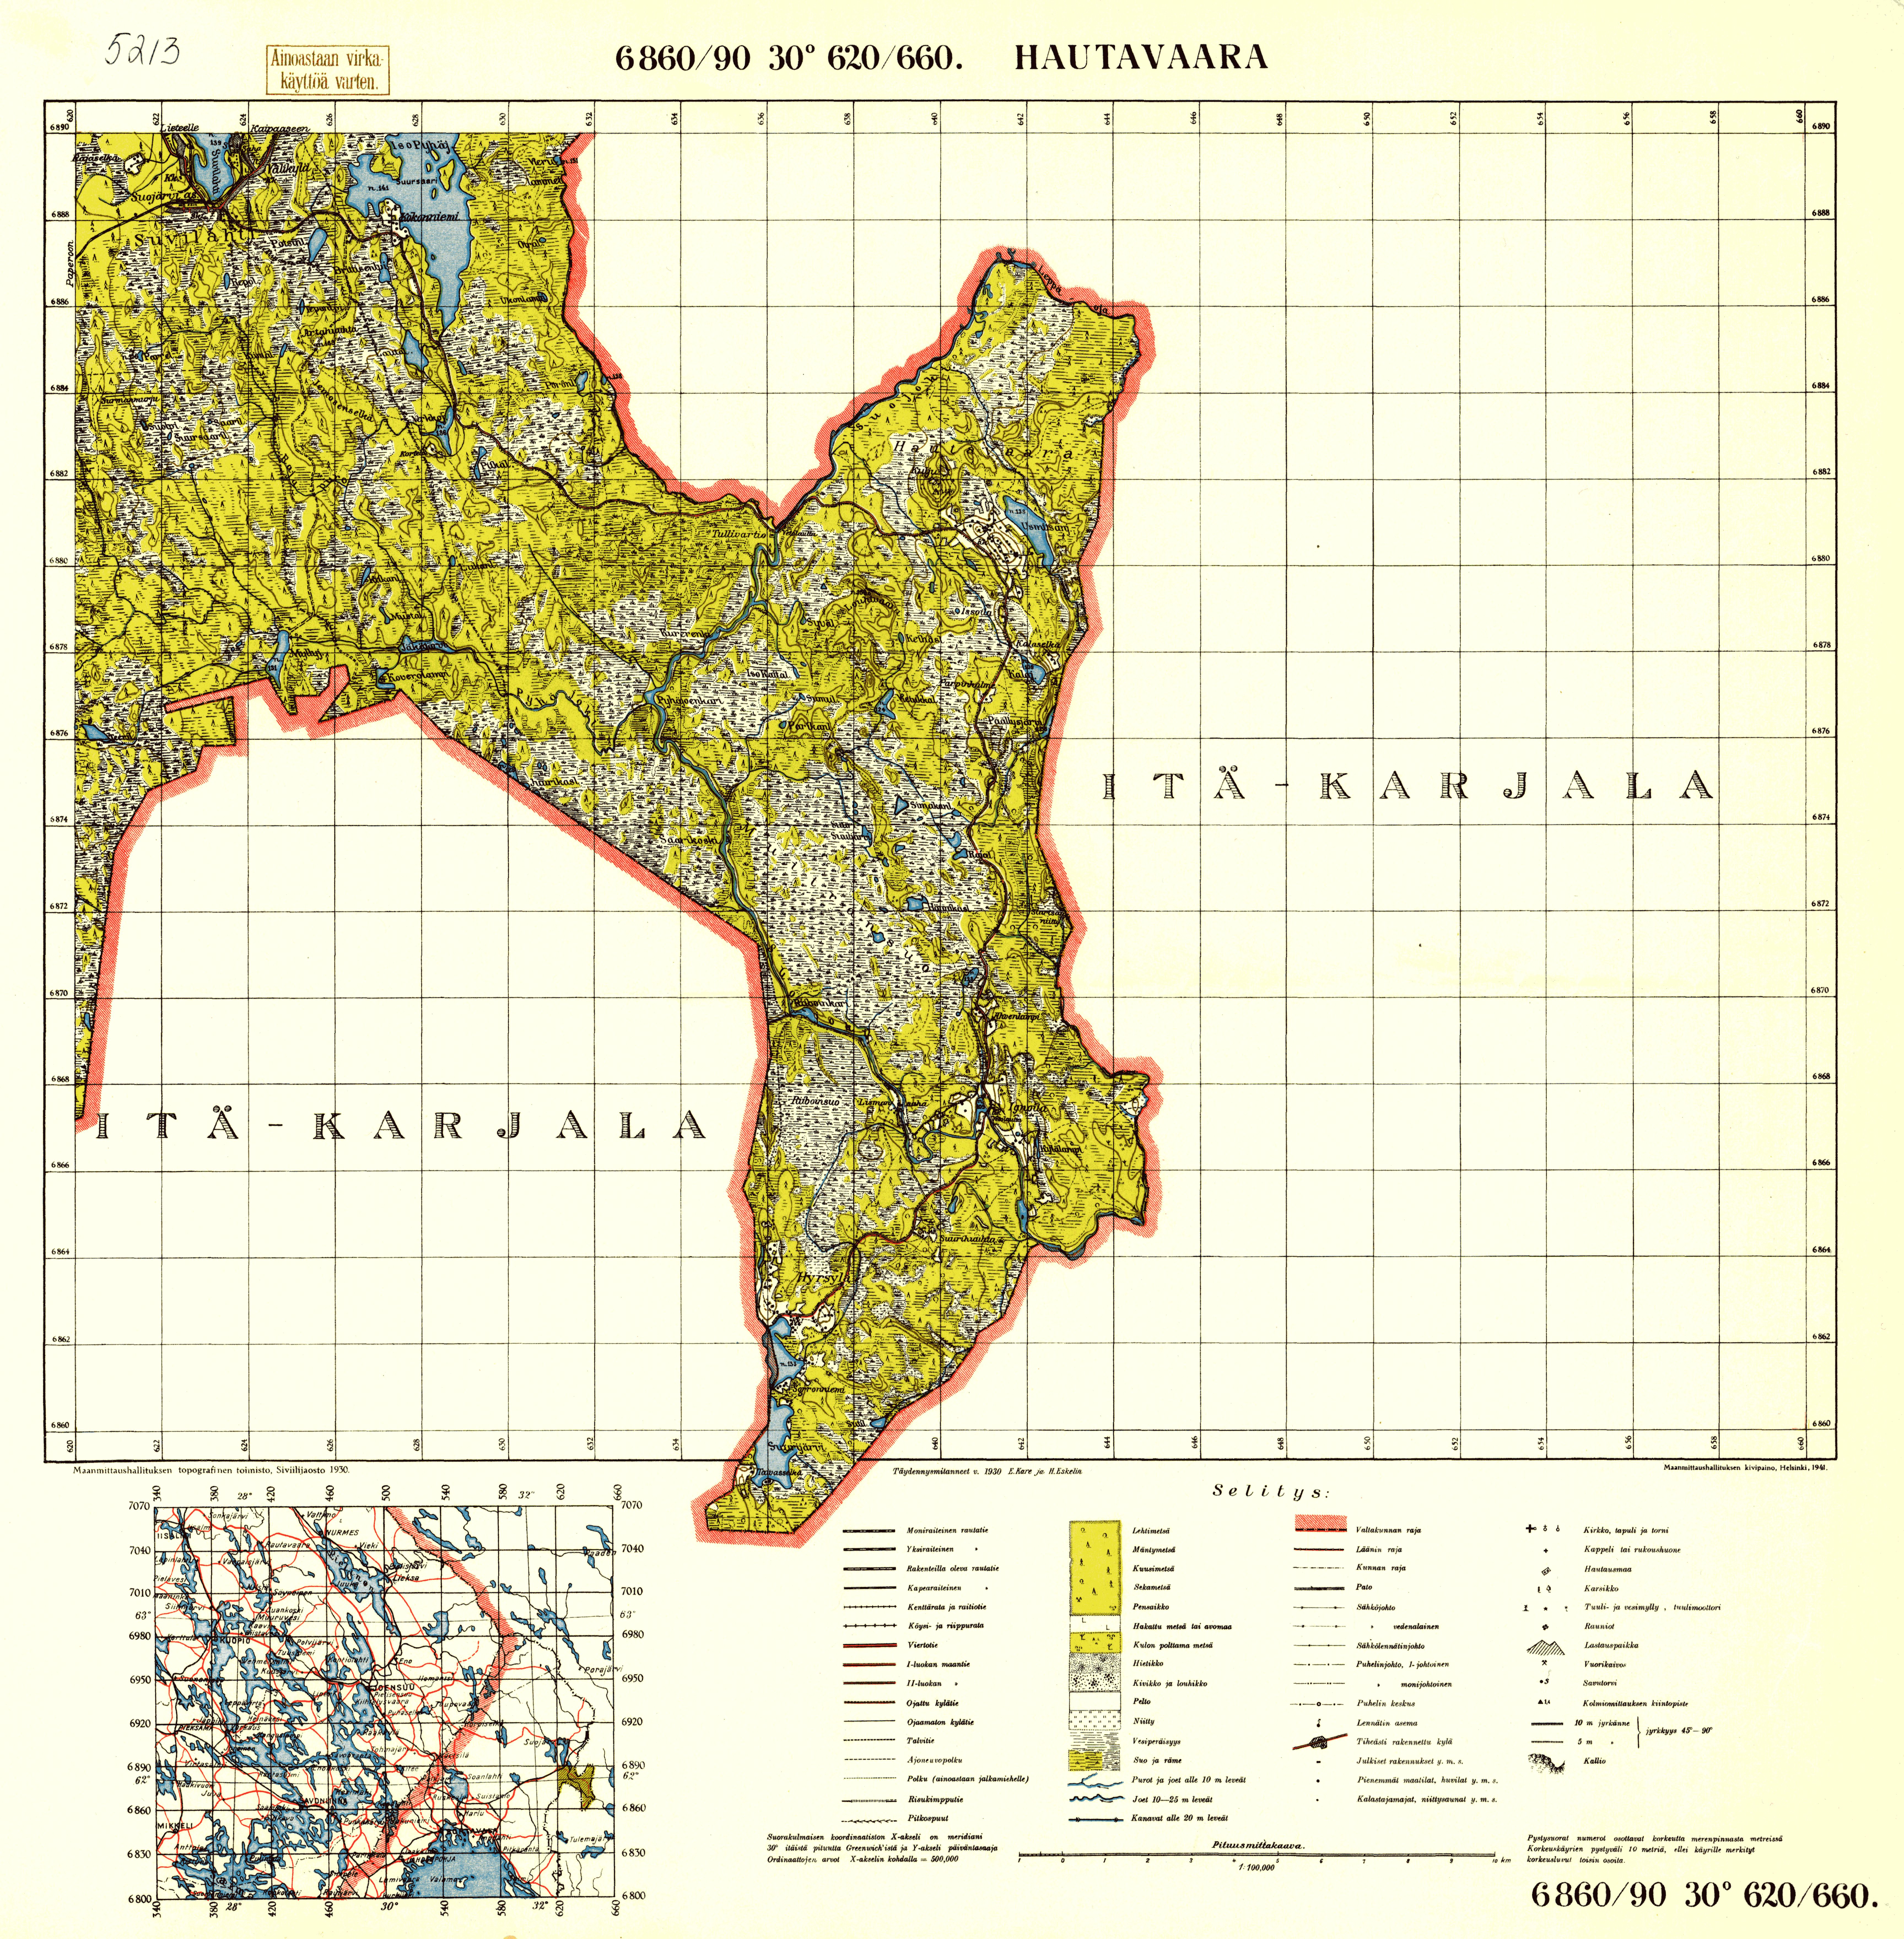 Hautavaara. Topografikartta 5213, 5124. Topographic map from 1941. Use the zooming tool to explore in higher level of detail. Obtain as a quality print or high resolution image